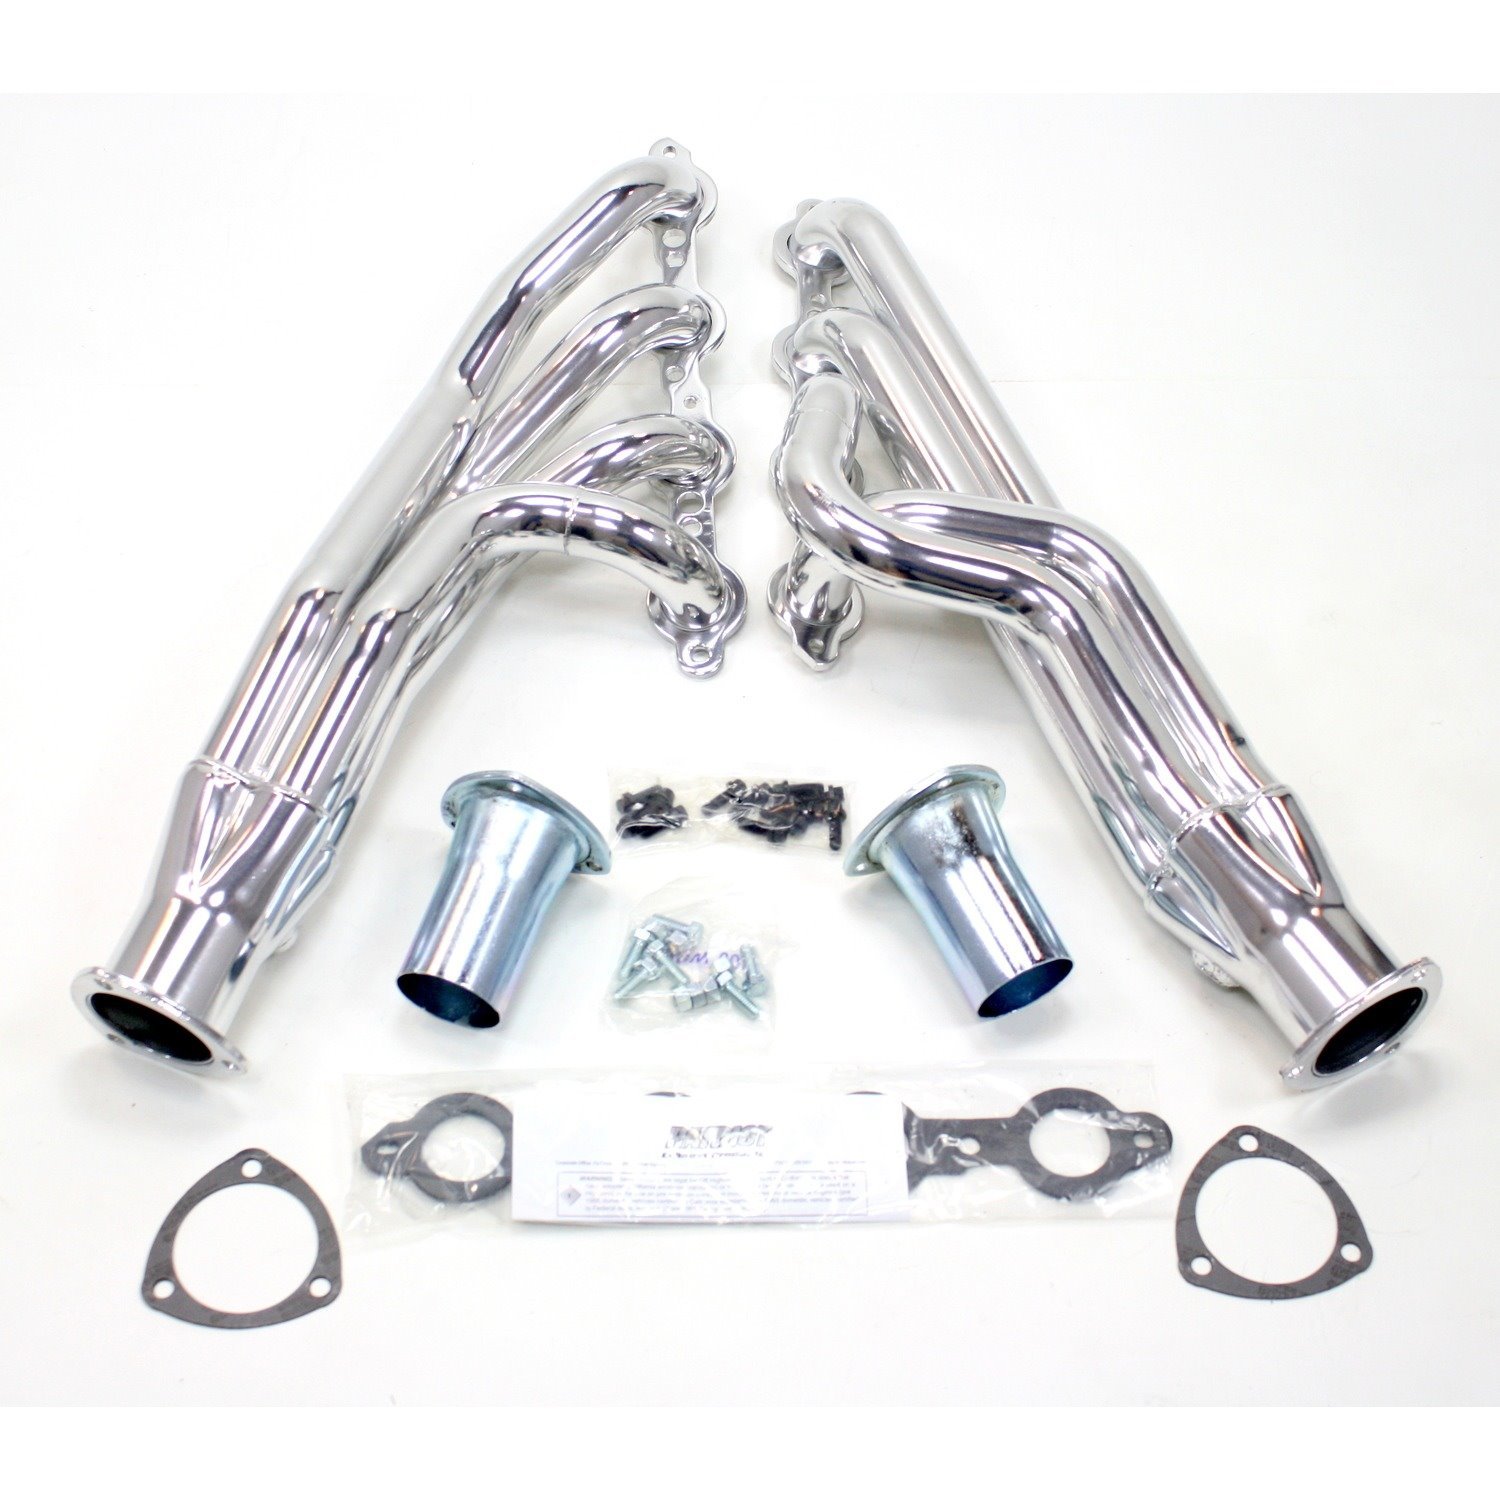 GM Specific Fit Headers 1973-1987 1/2, 3/4 Ton